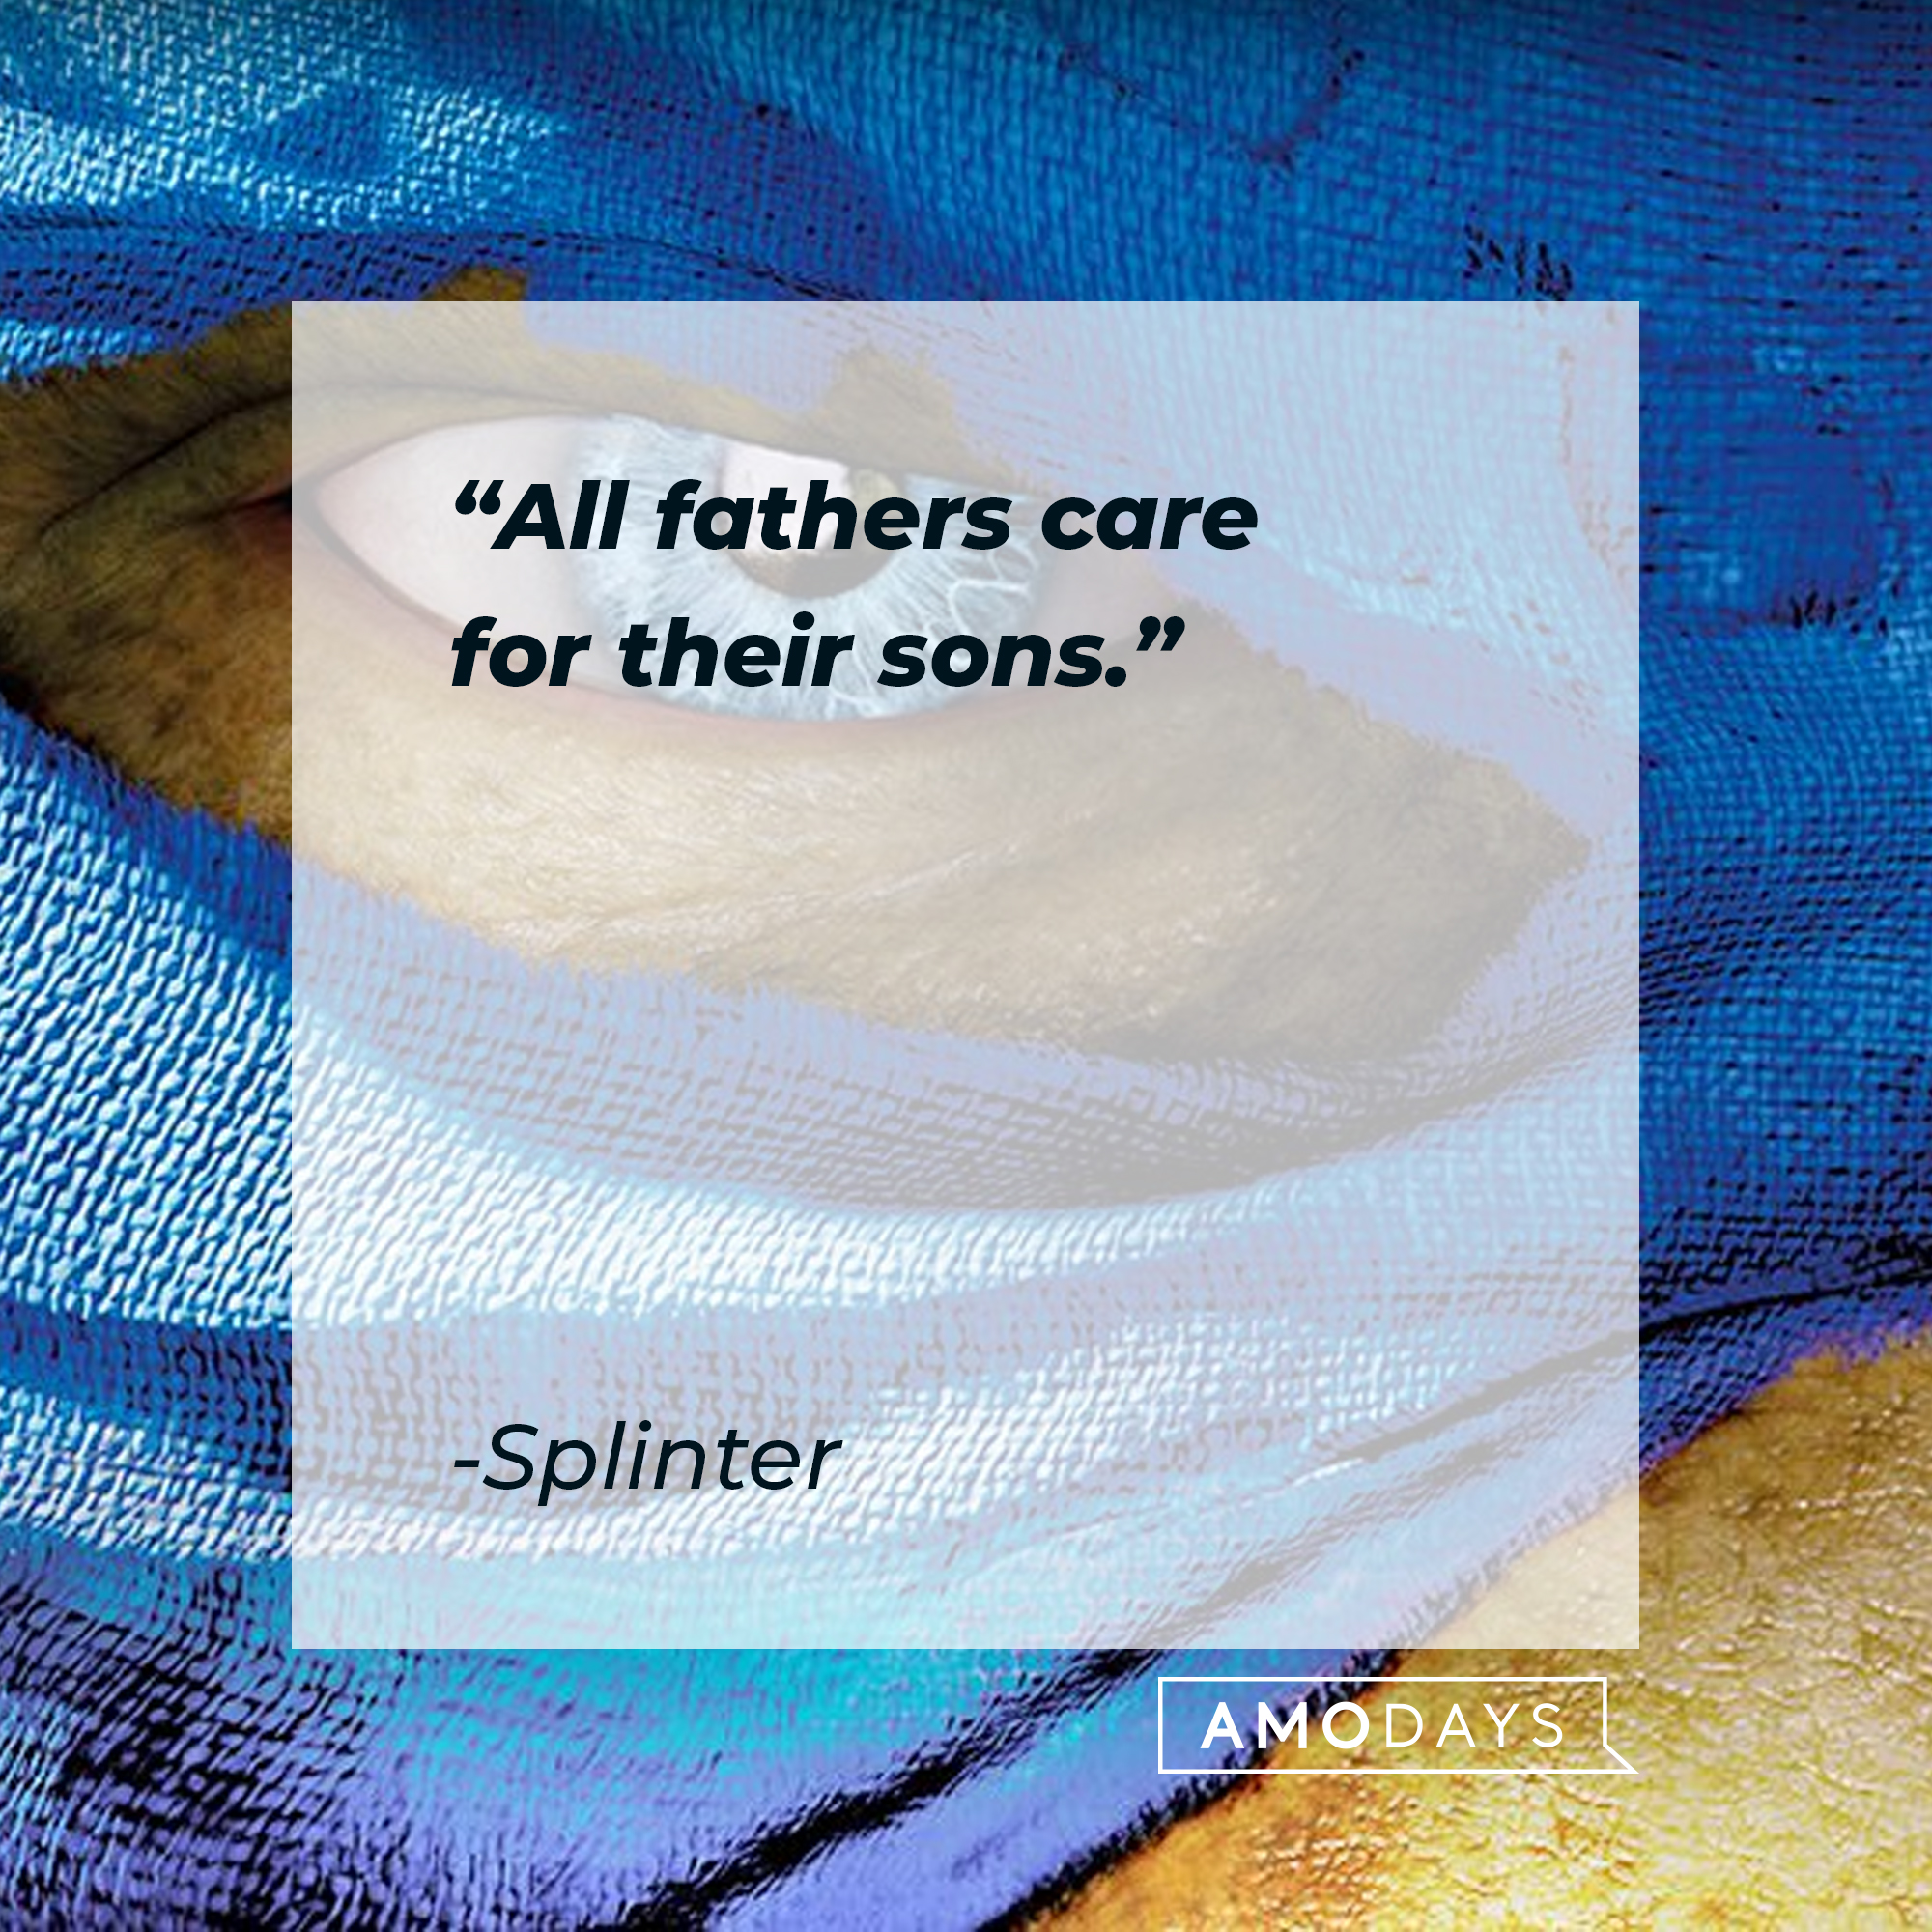 Splinters' quote: "All fathers care for their sons." | Source: facebook.com/TMNT